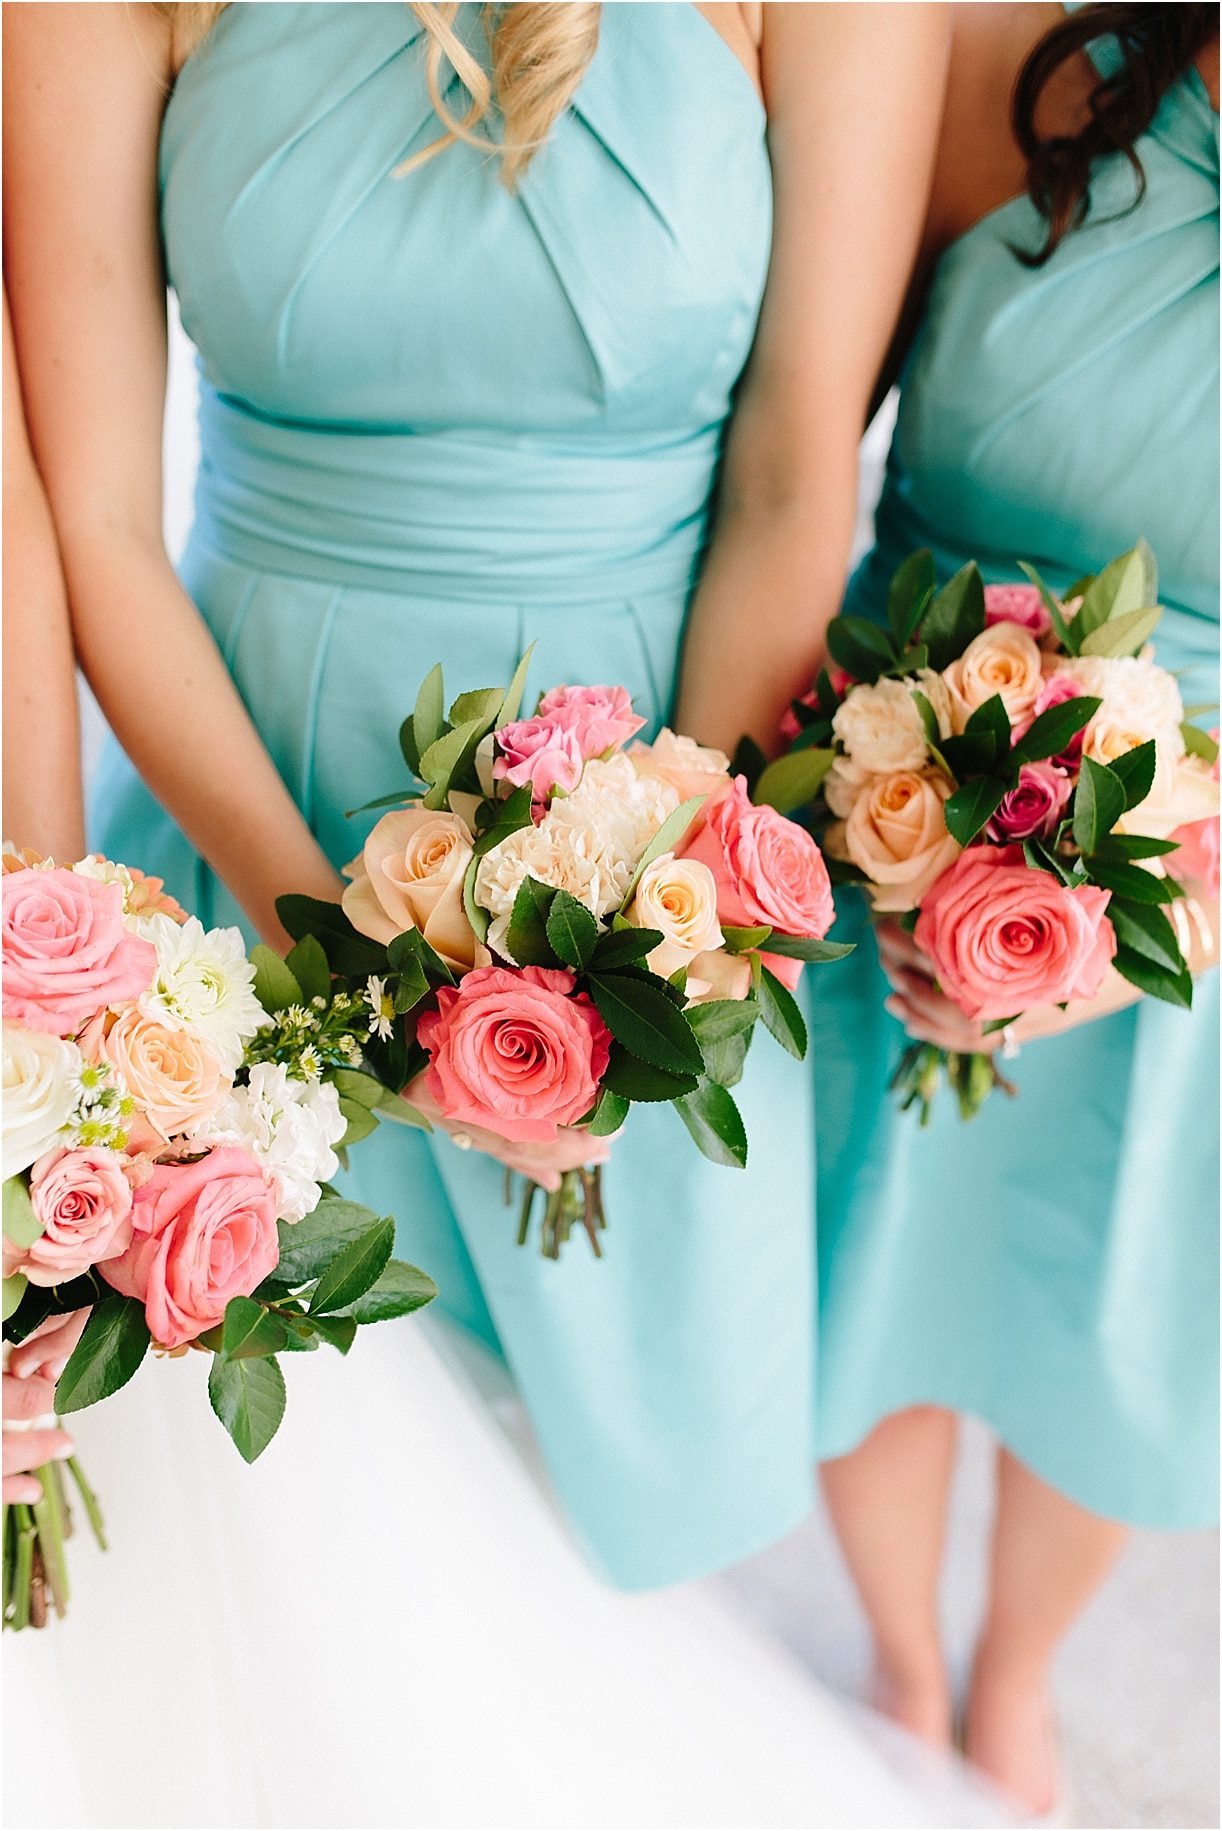 A Pink and Aqua Roanoke Virginia Wedding as seen on Hill City Bride Blog and Magazine - bridesmaids, flowers